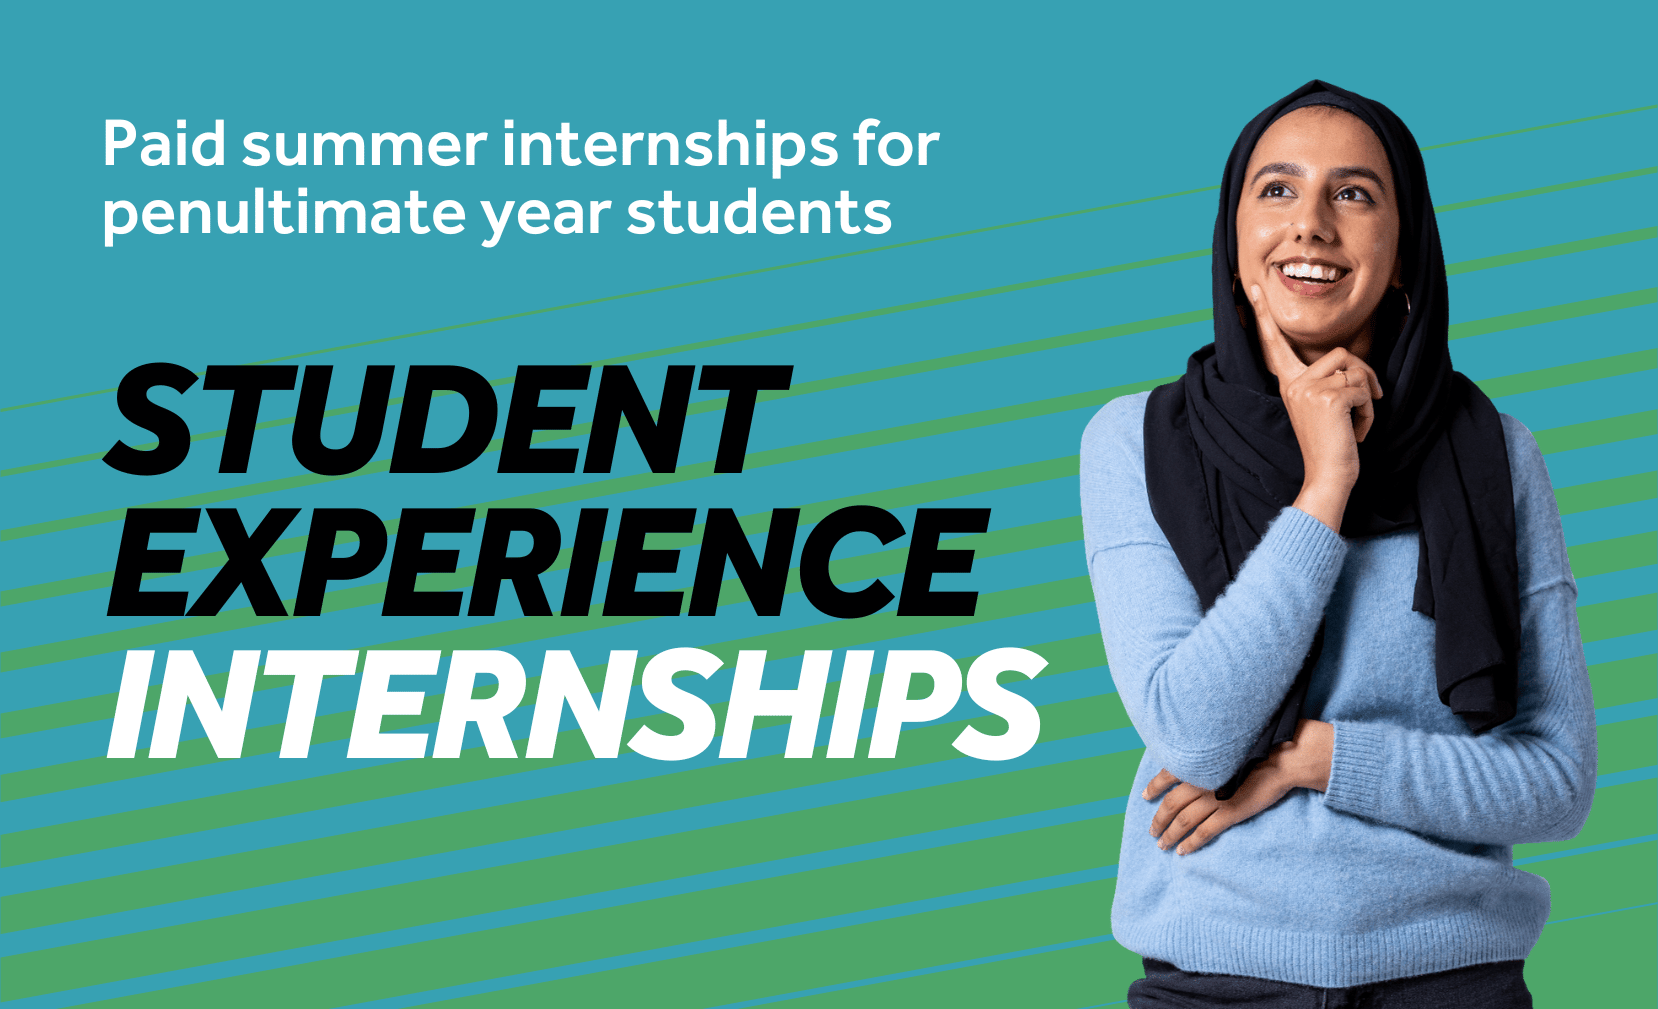 Teal background with green diagonal lines. Image features a student smiling with their finger to their chin, looking upwards in thought. Text reads: Student Experience Internships, Summer internships for penultimate year students.